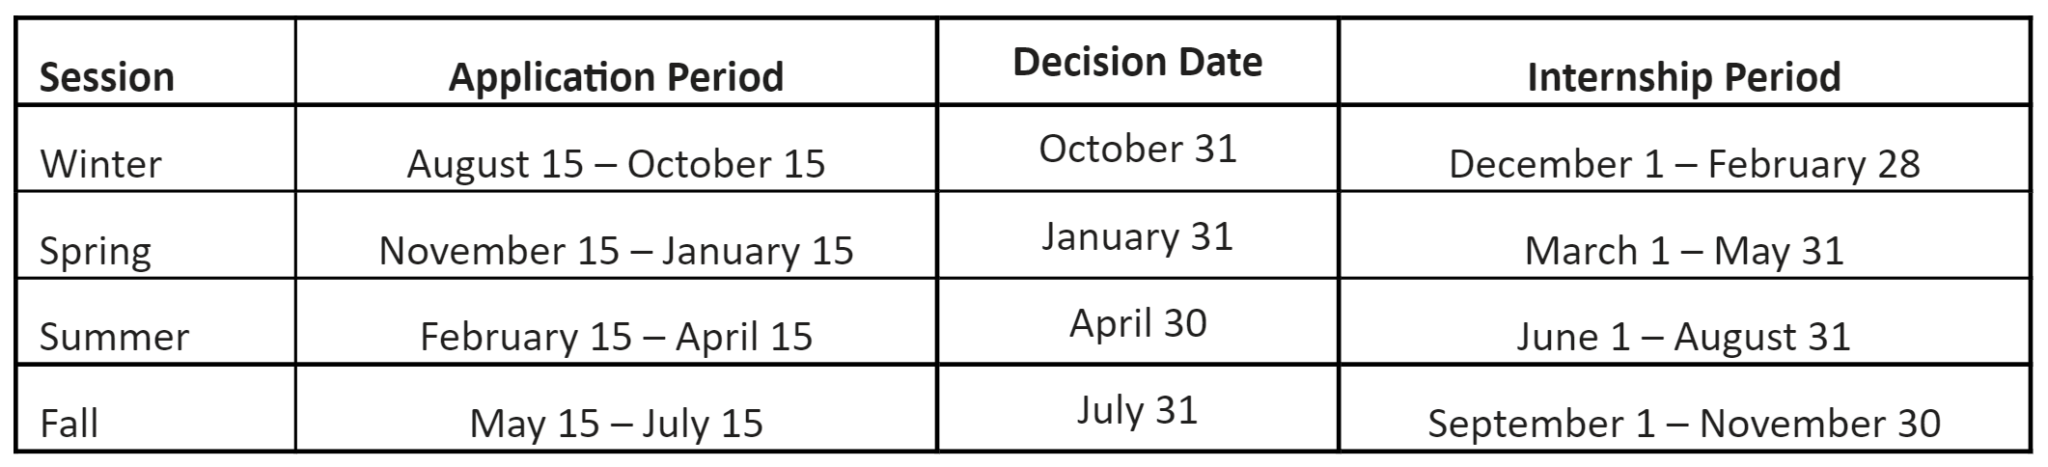 Research Intern Application Period Chart